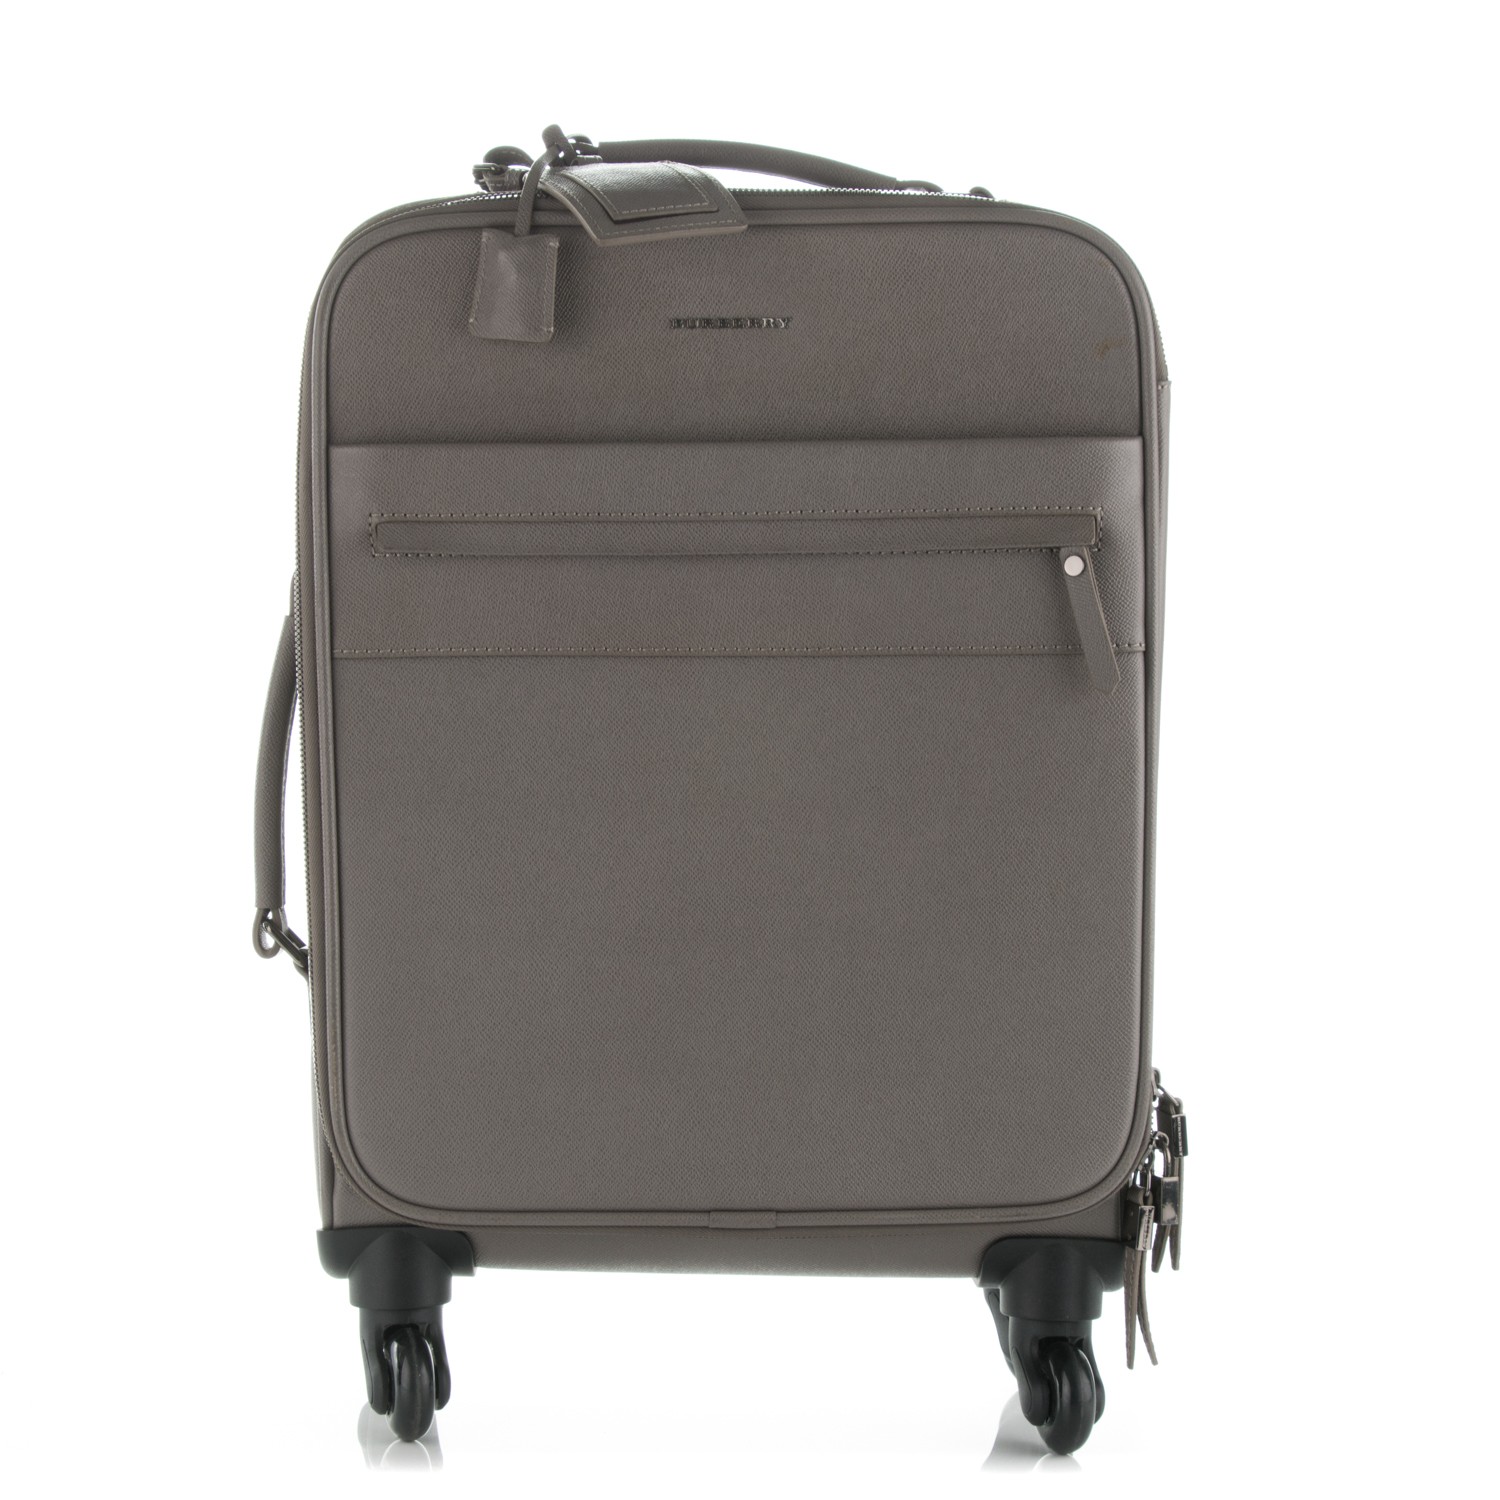 burberry carry on suitcase